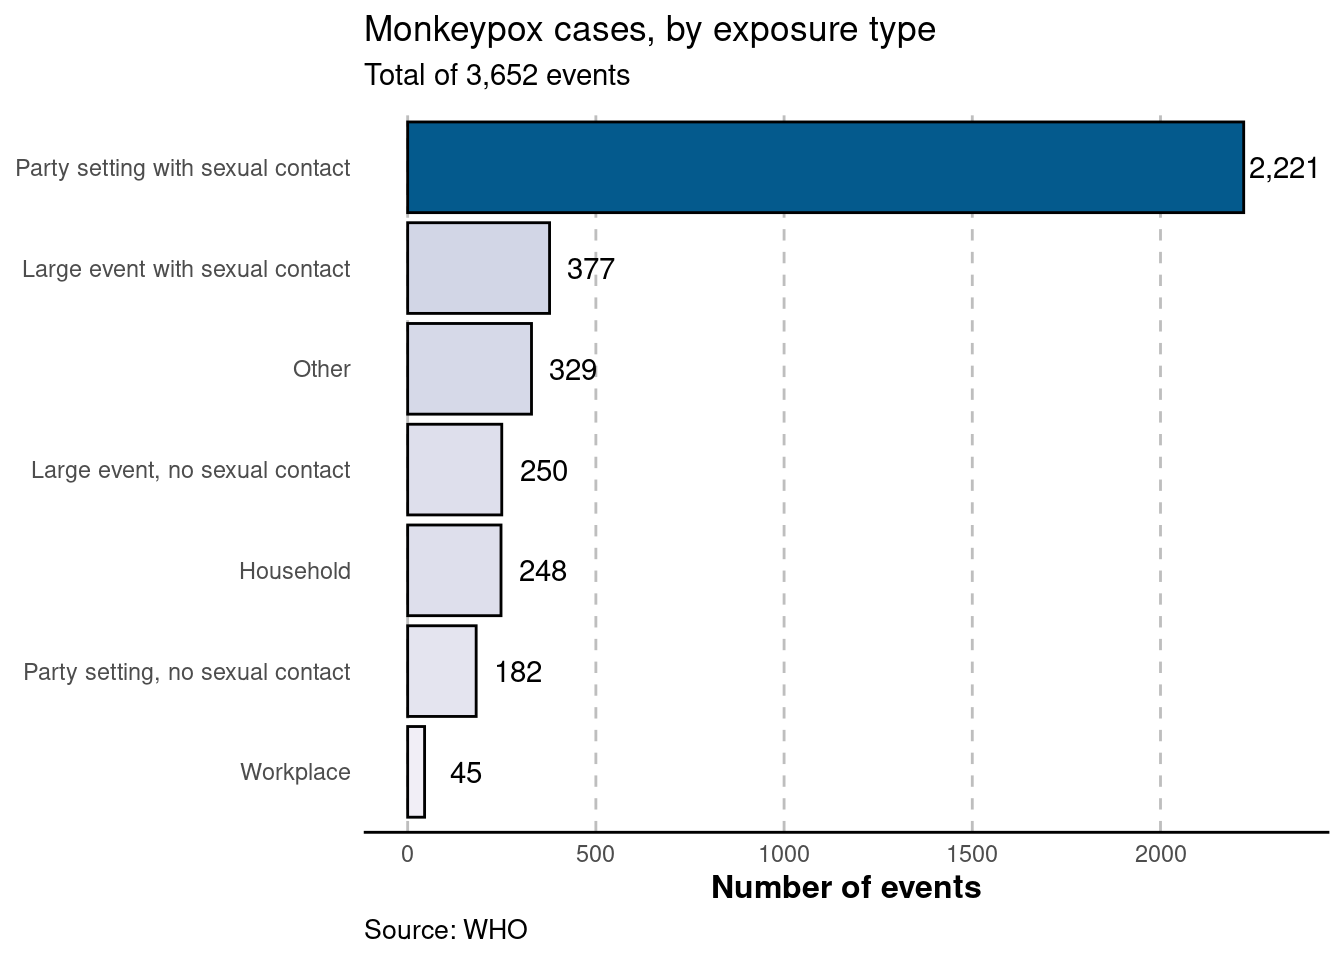 Bar chart showing monkeypox cases by exposure type from World Health Organization